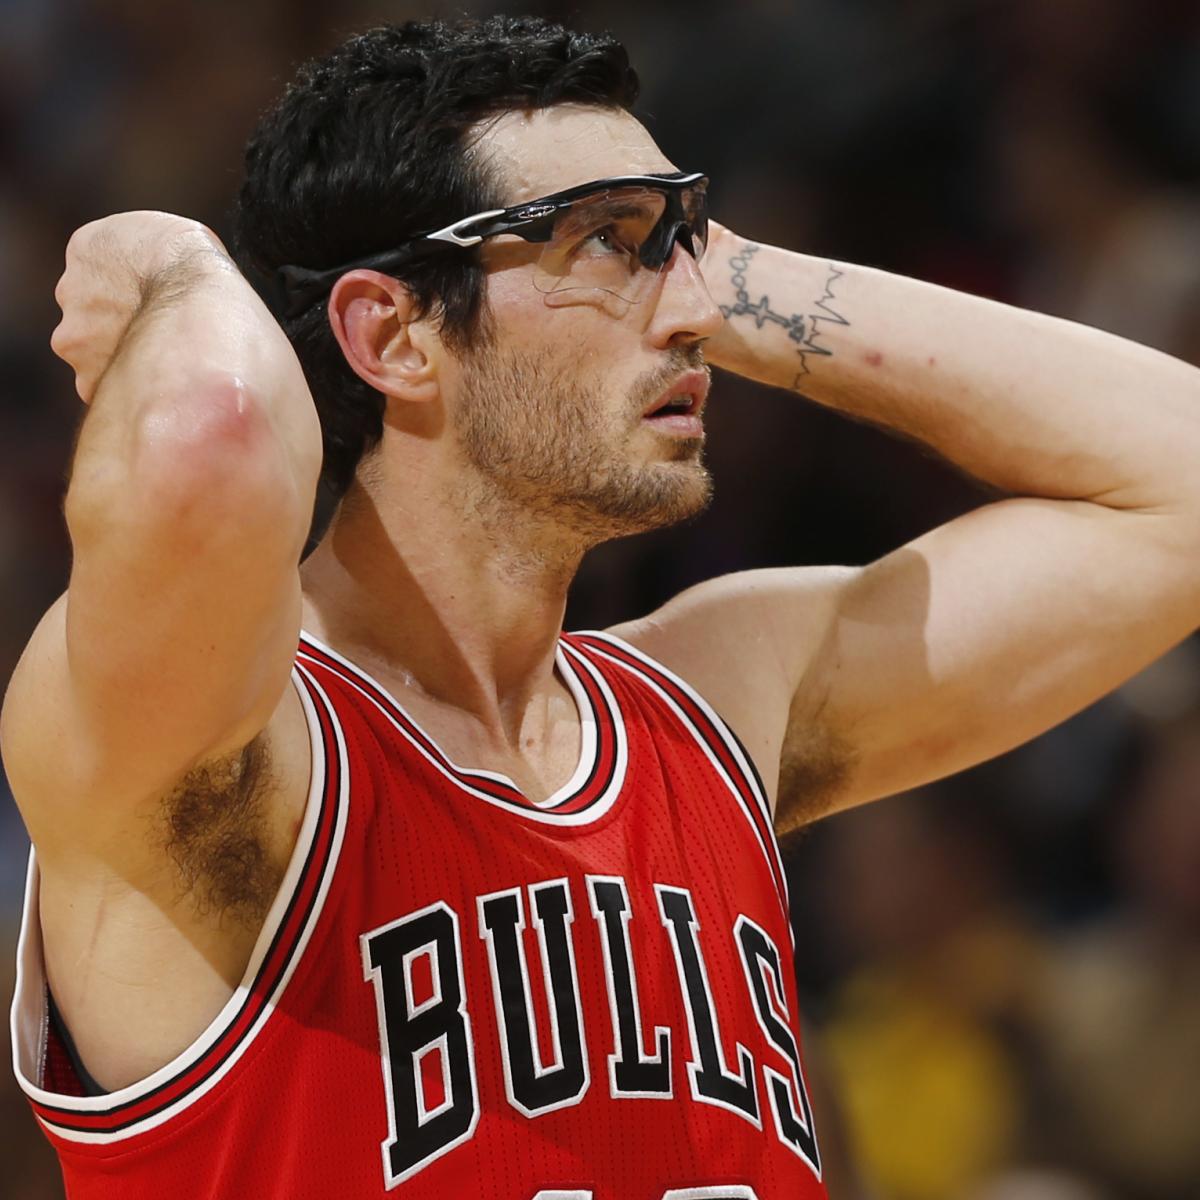 Modern NBA wimps need protective gear article by Yahoo shows a picture  of Kirk Hinrich and his protective eyewear, glasses he has to wear to not  lose his sight in case of